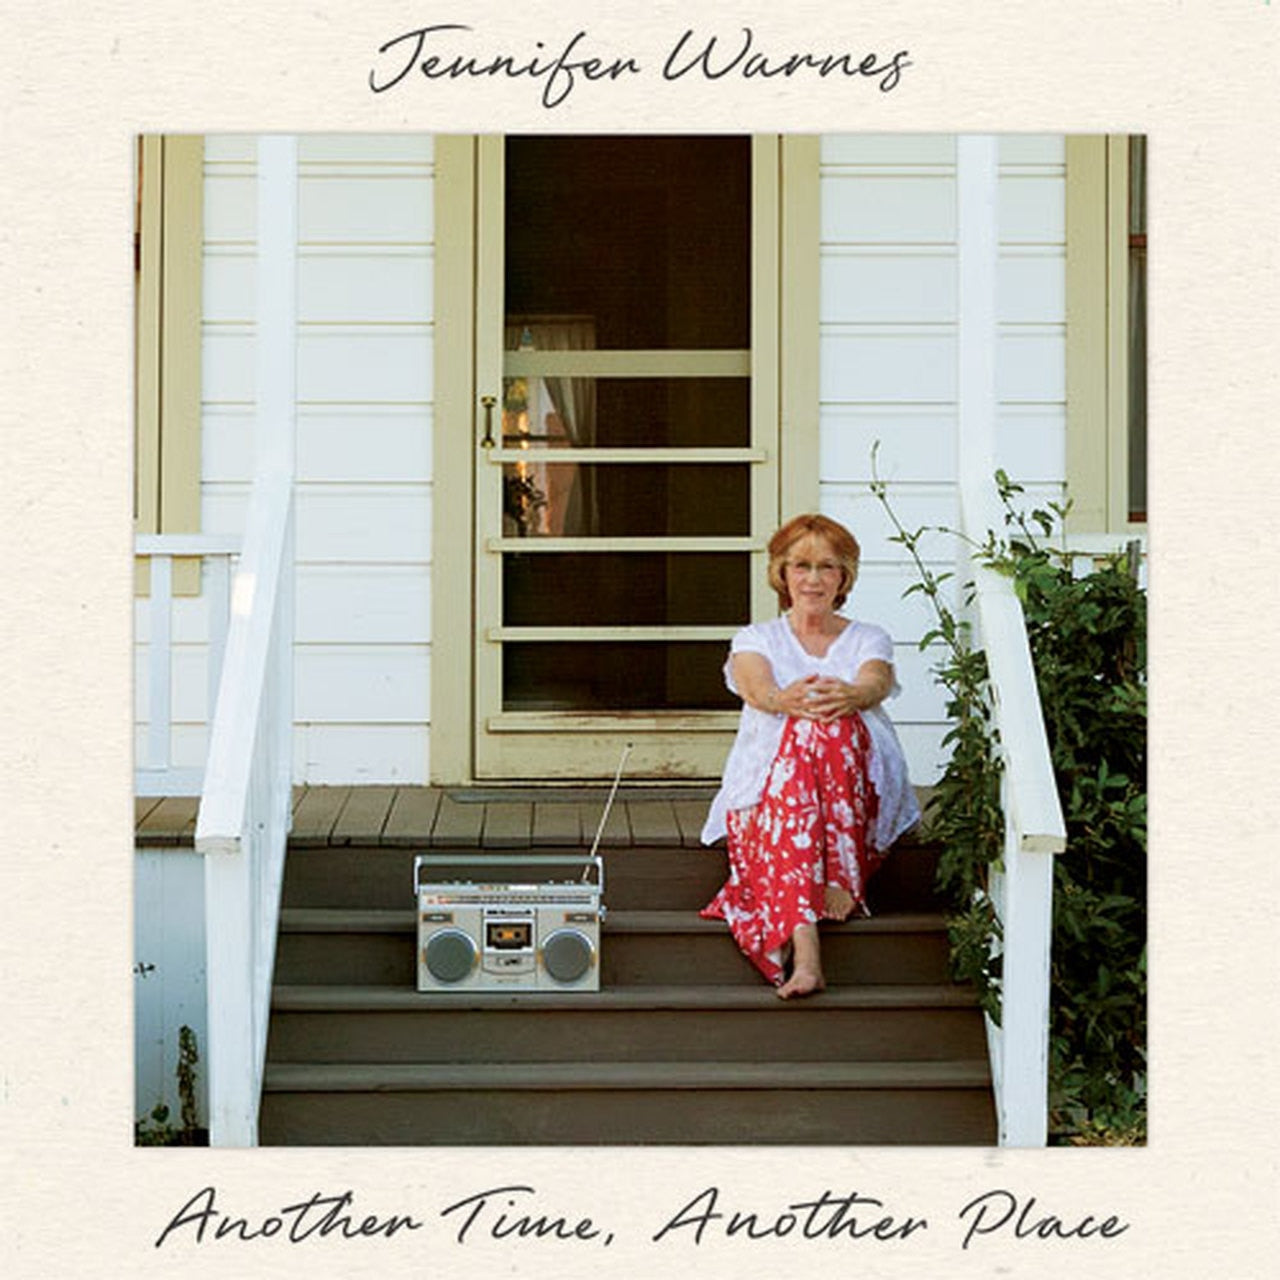 Jennifer Warnes - Another Time, Another Place - Impex LP